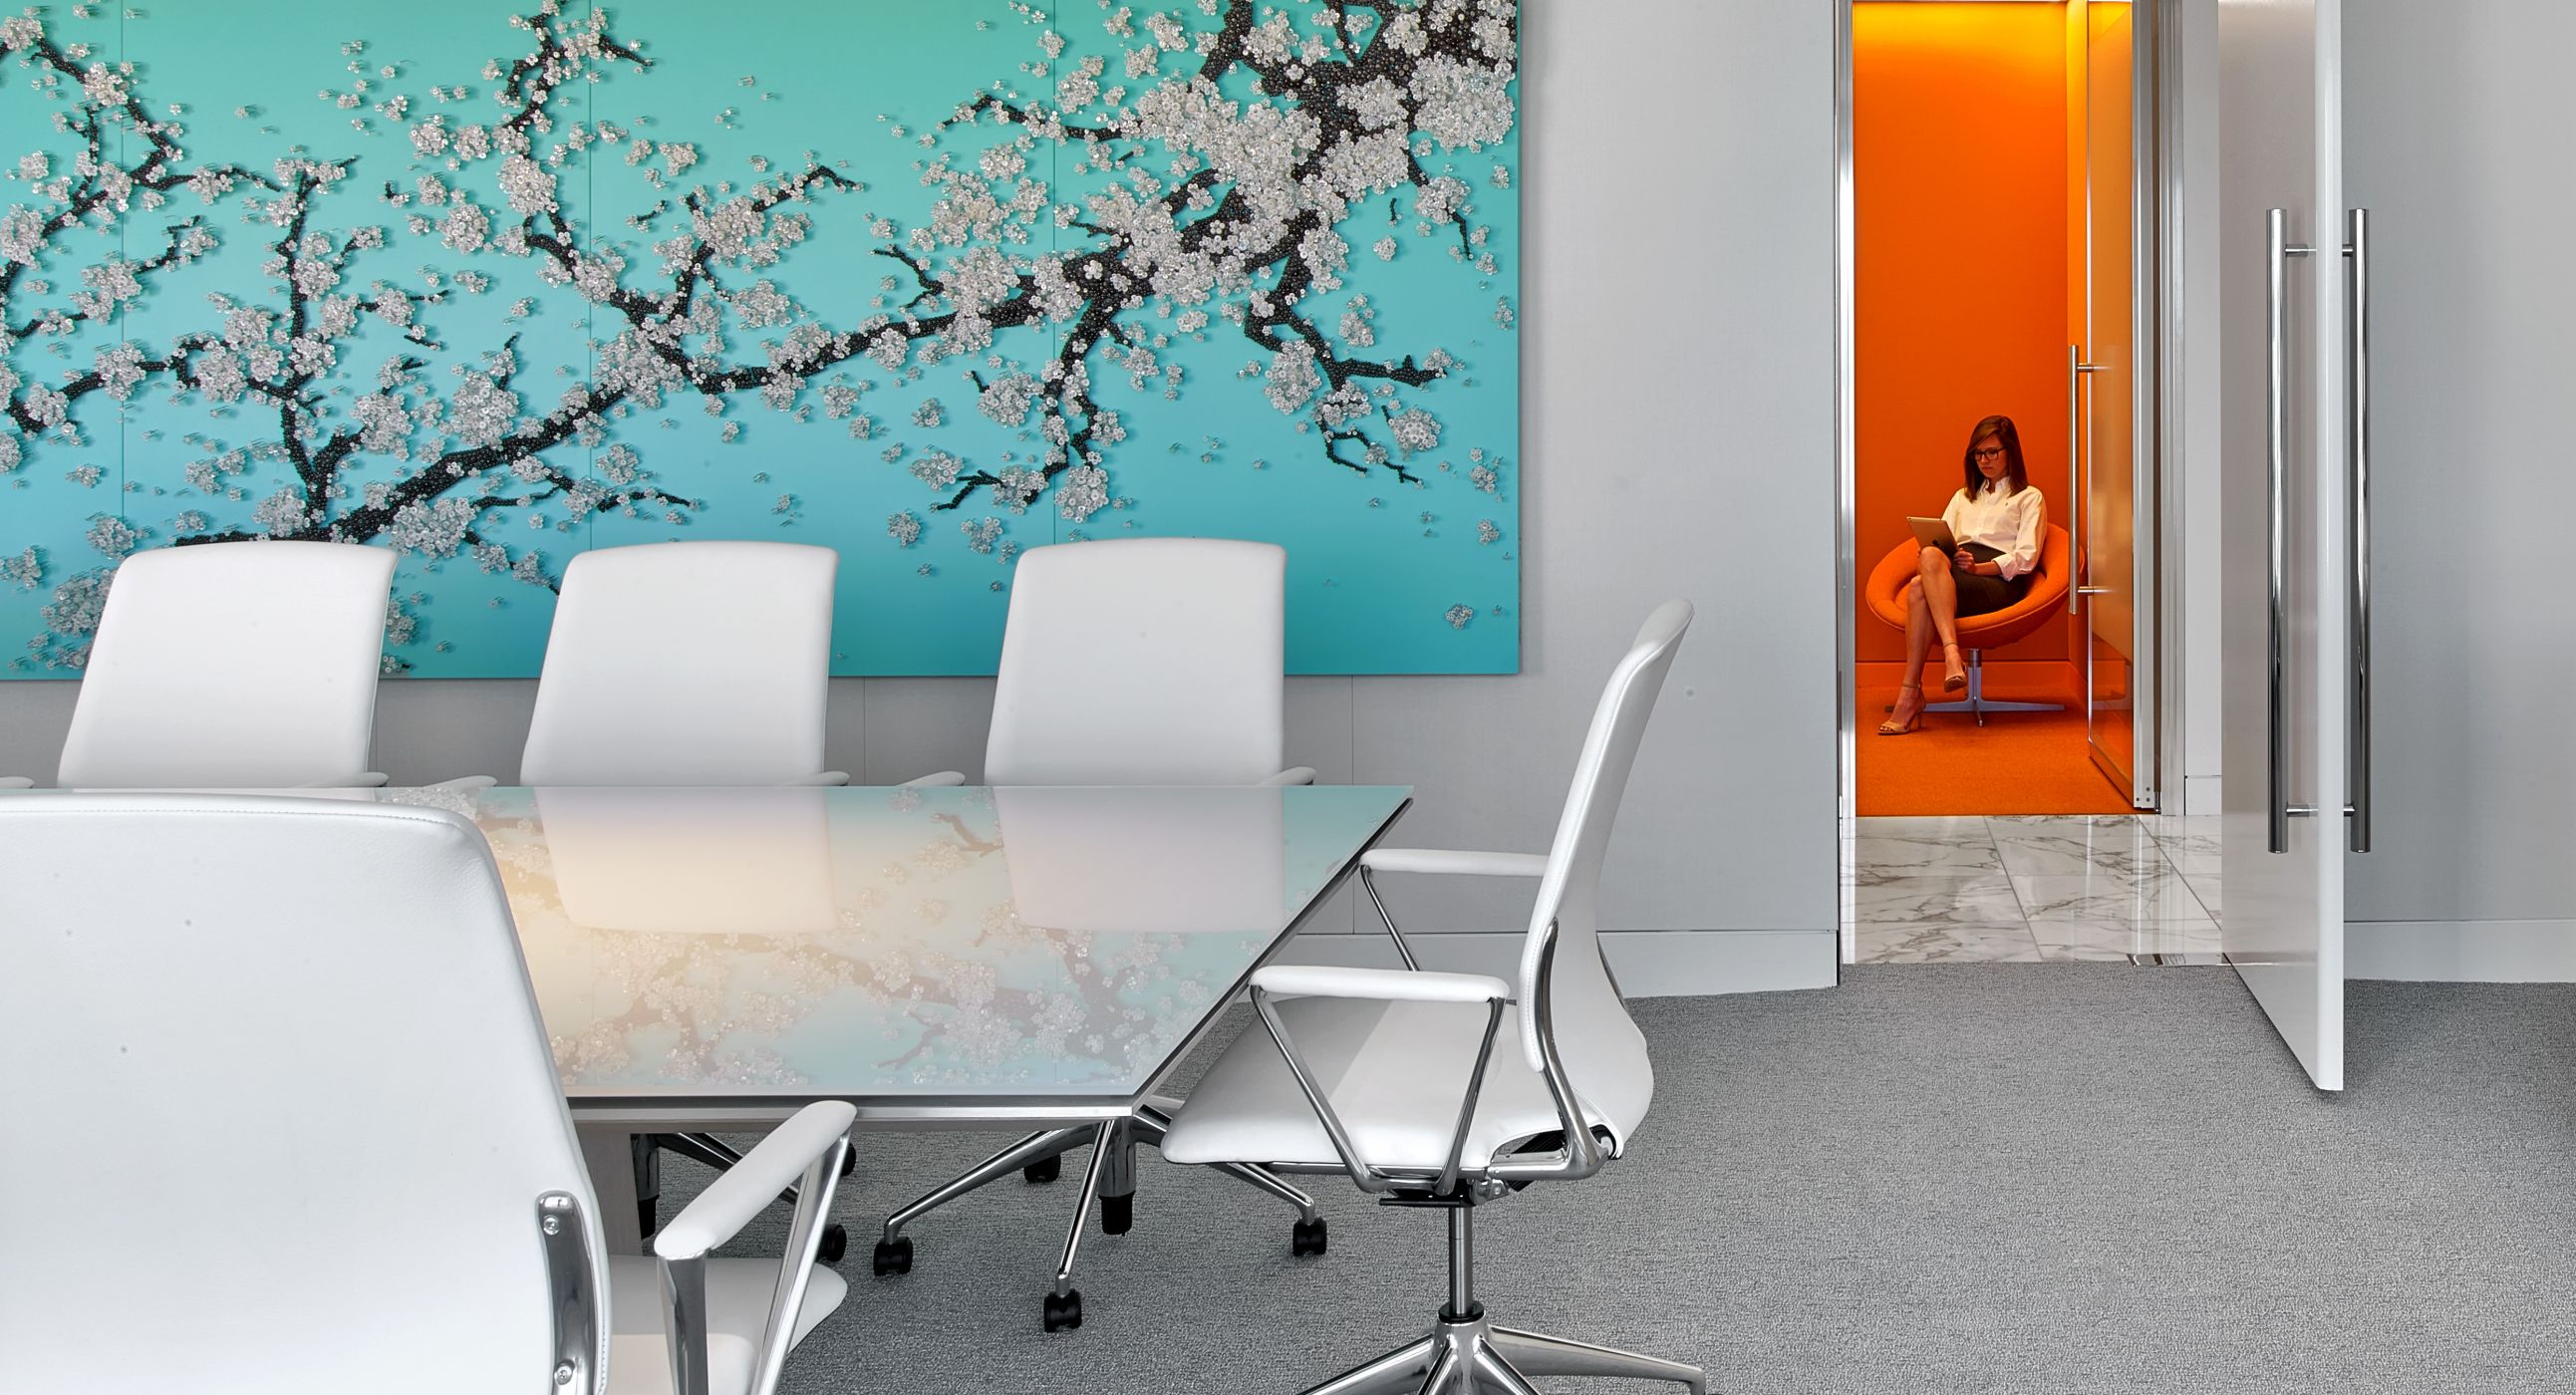 Glass MESA tables provide a beautiful, clean meeting surface for this colorful office.